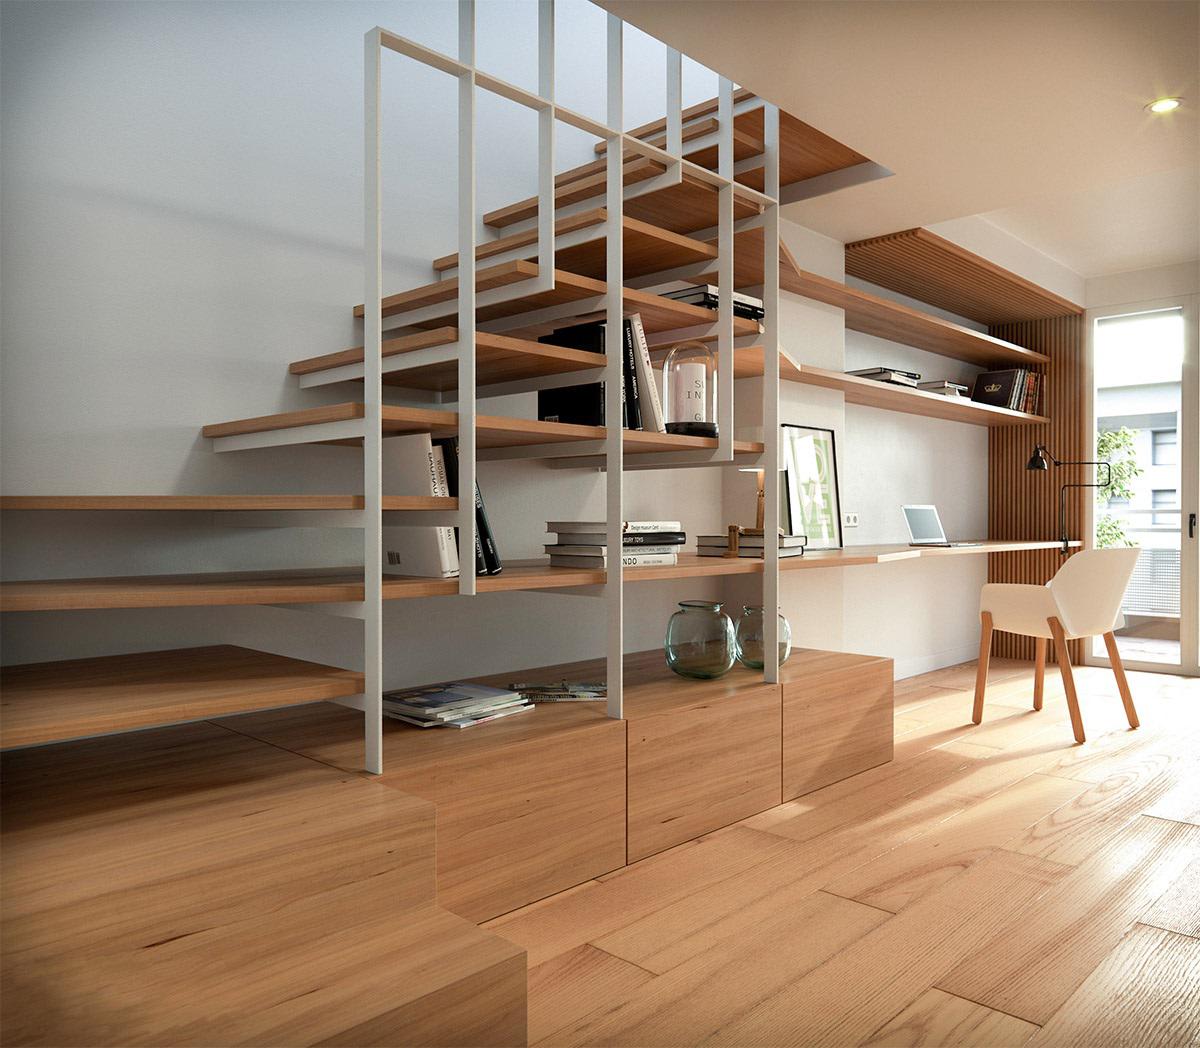 Integrating a staircase with bookshelves and an office space